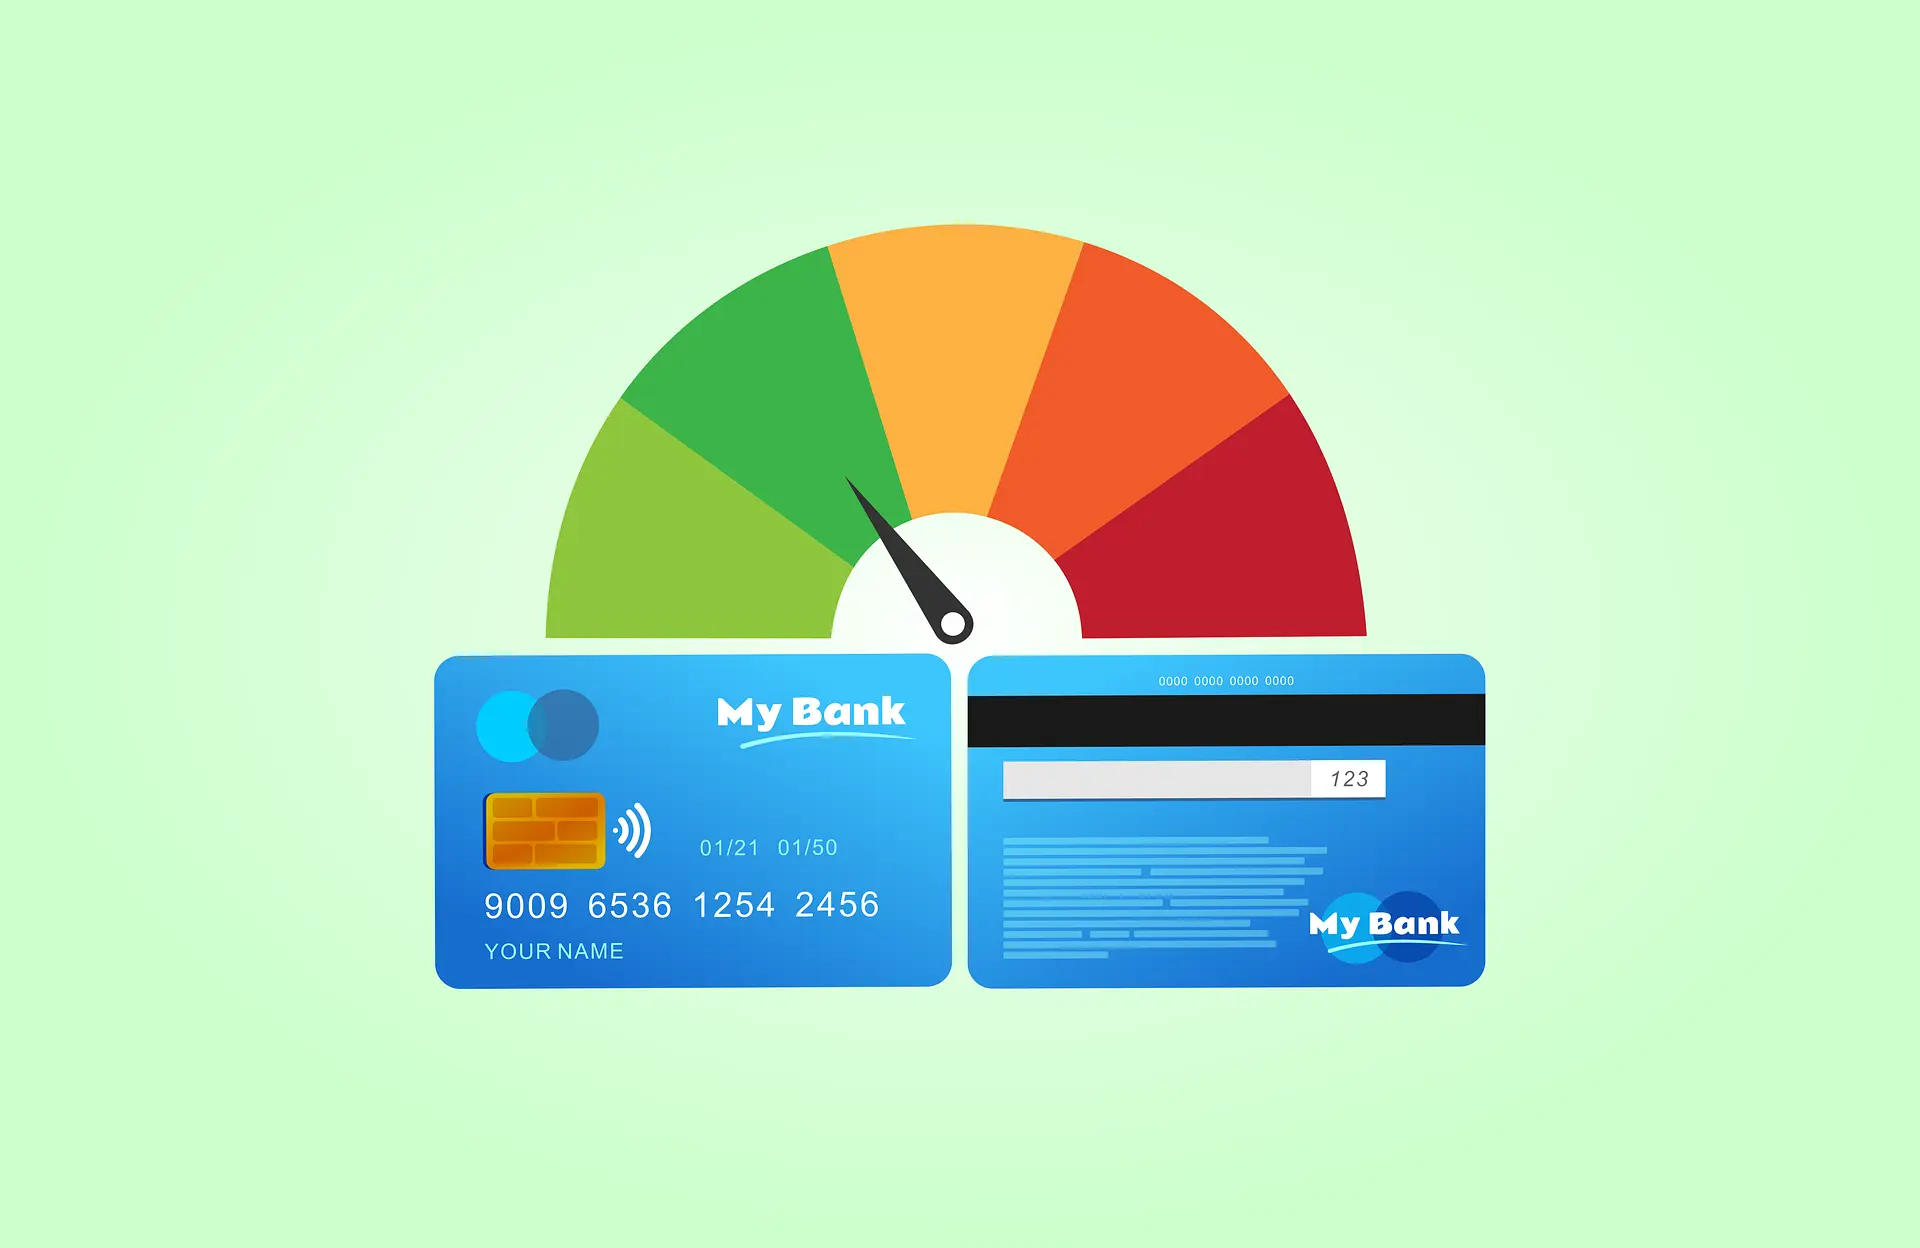 How To Improve Your Credit Score, Tips & Advice